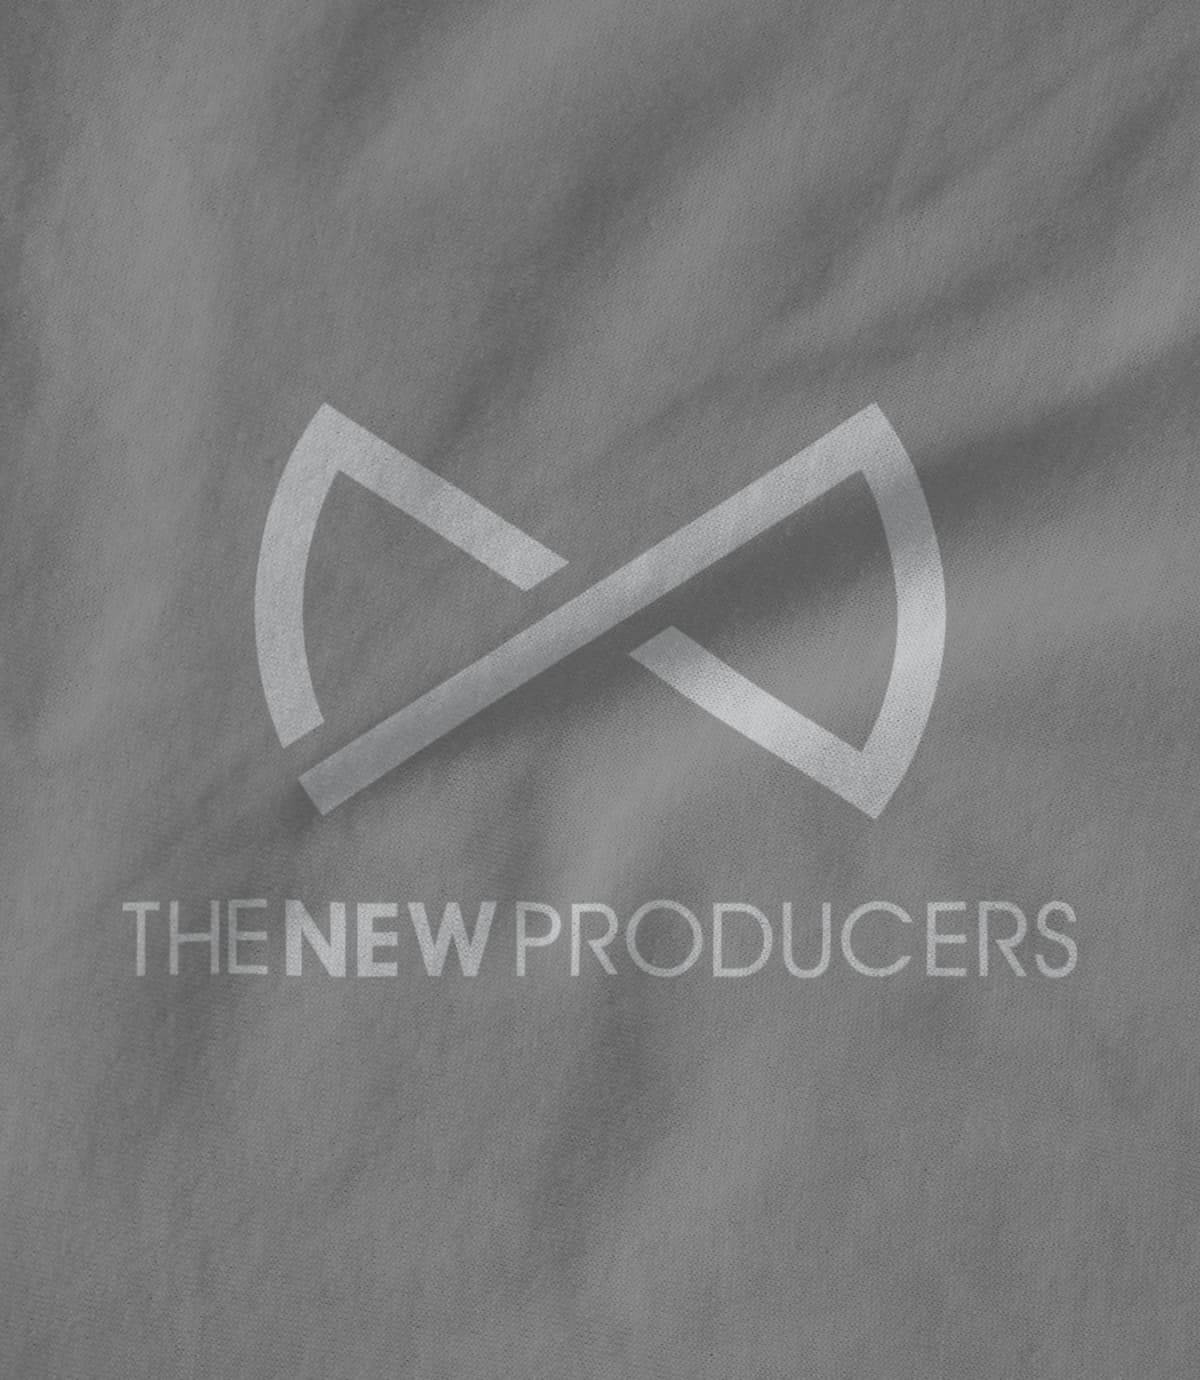 The New Producers